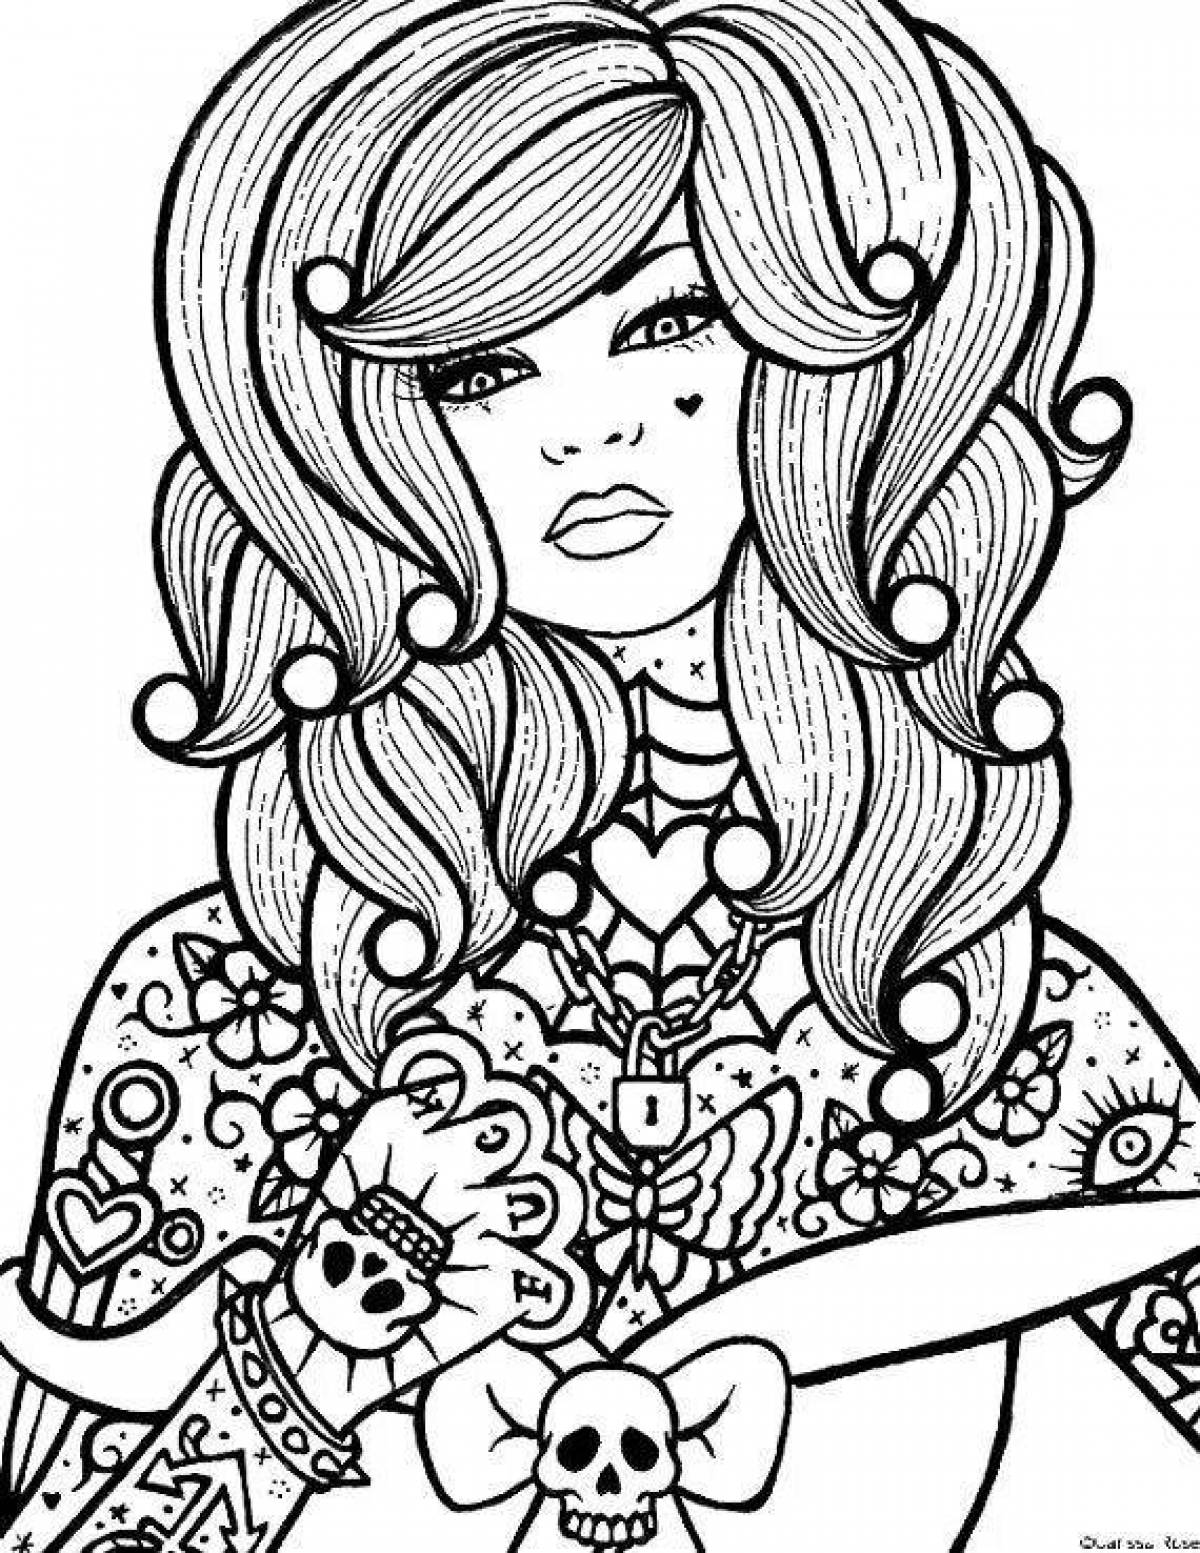 Dazzling coloring book for 18 year old girls